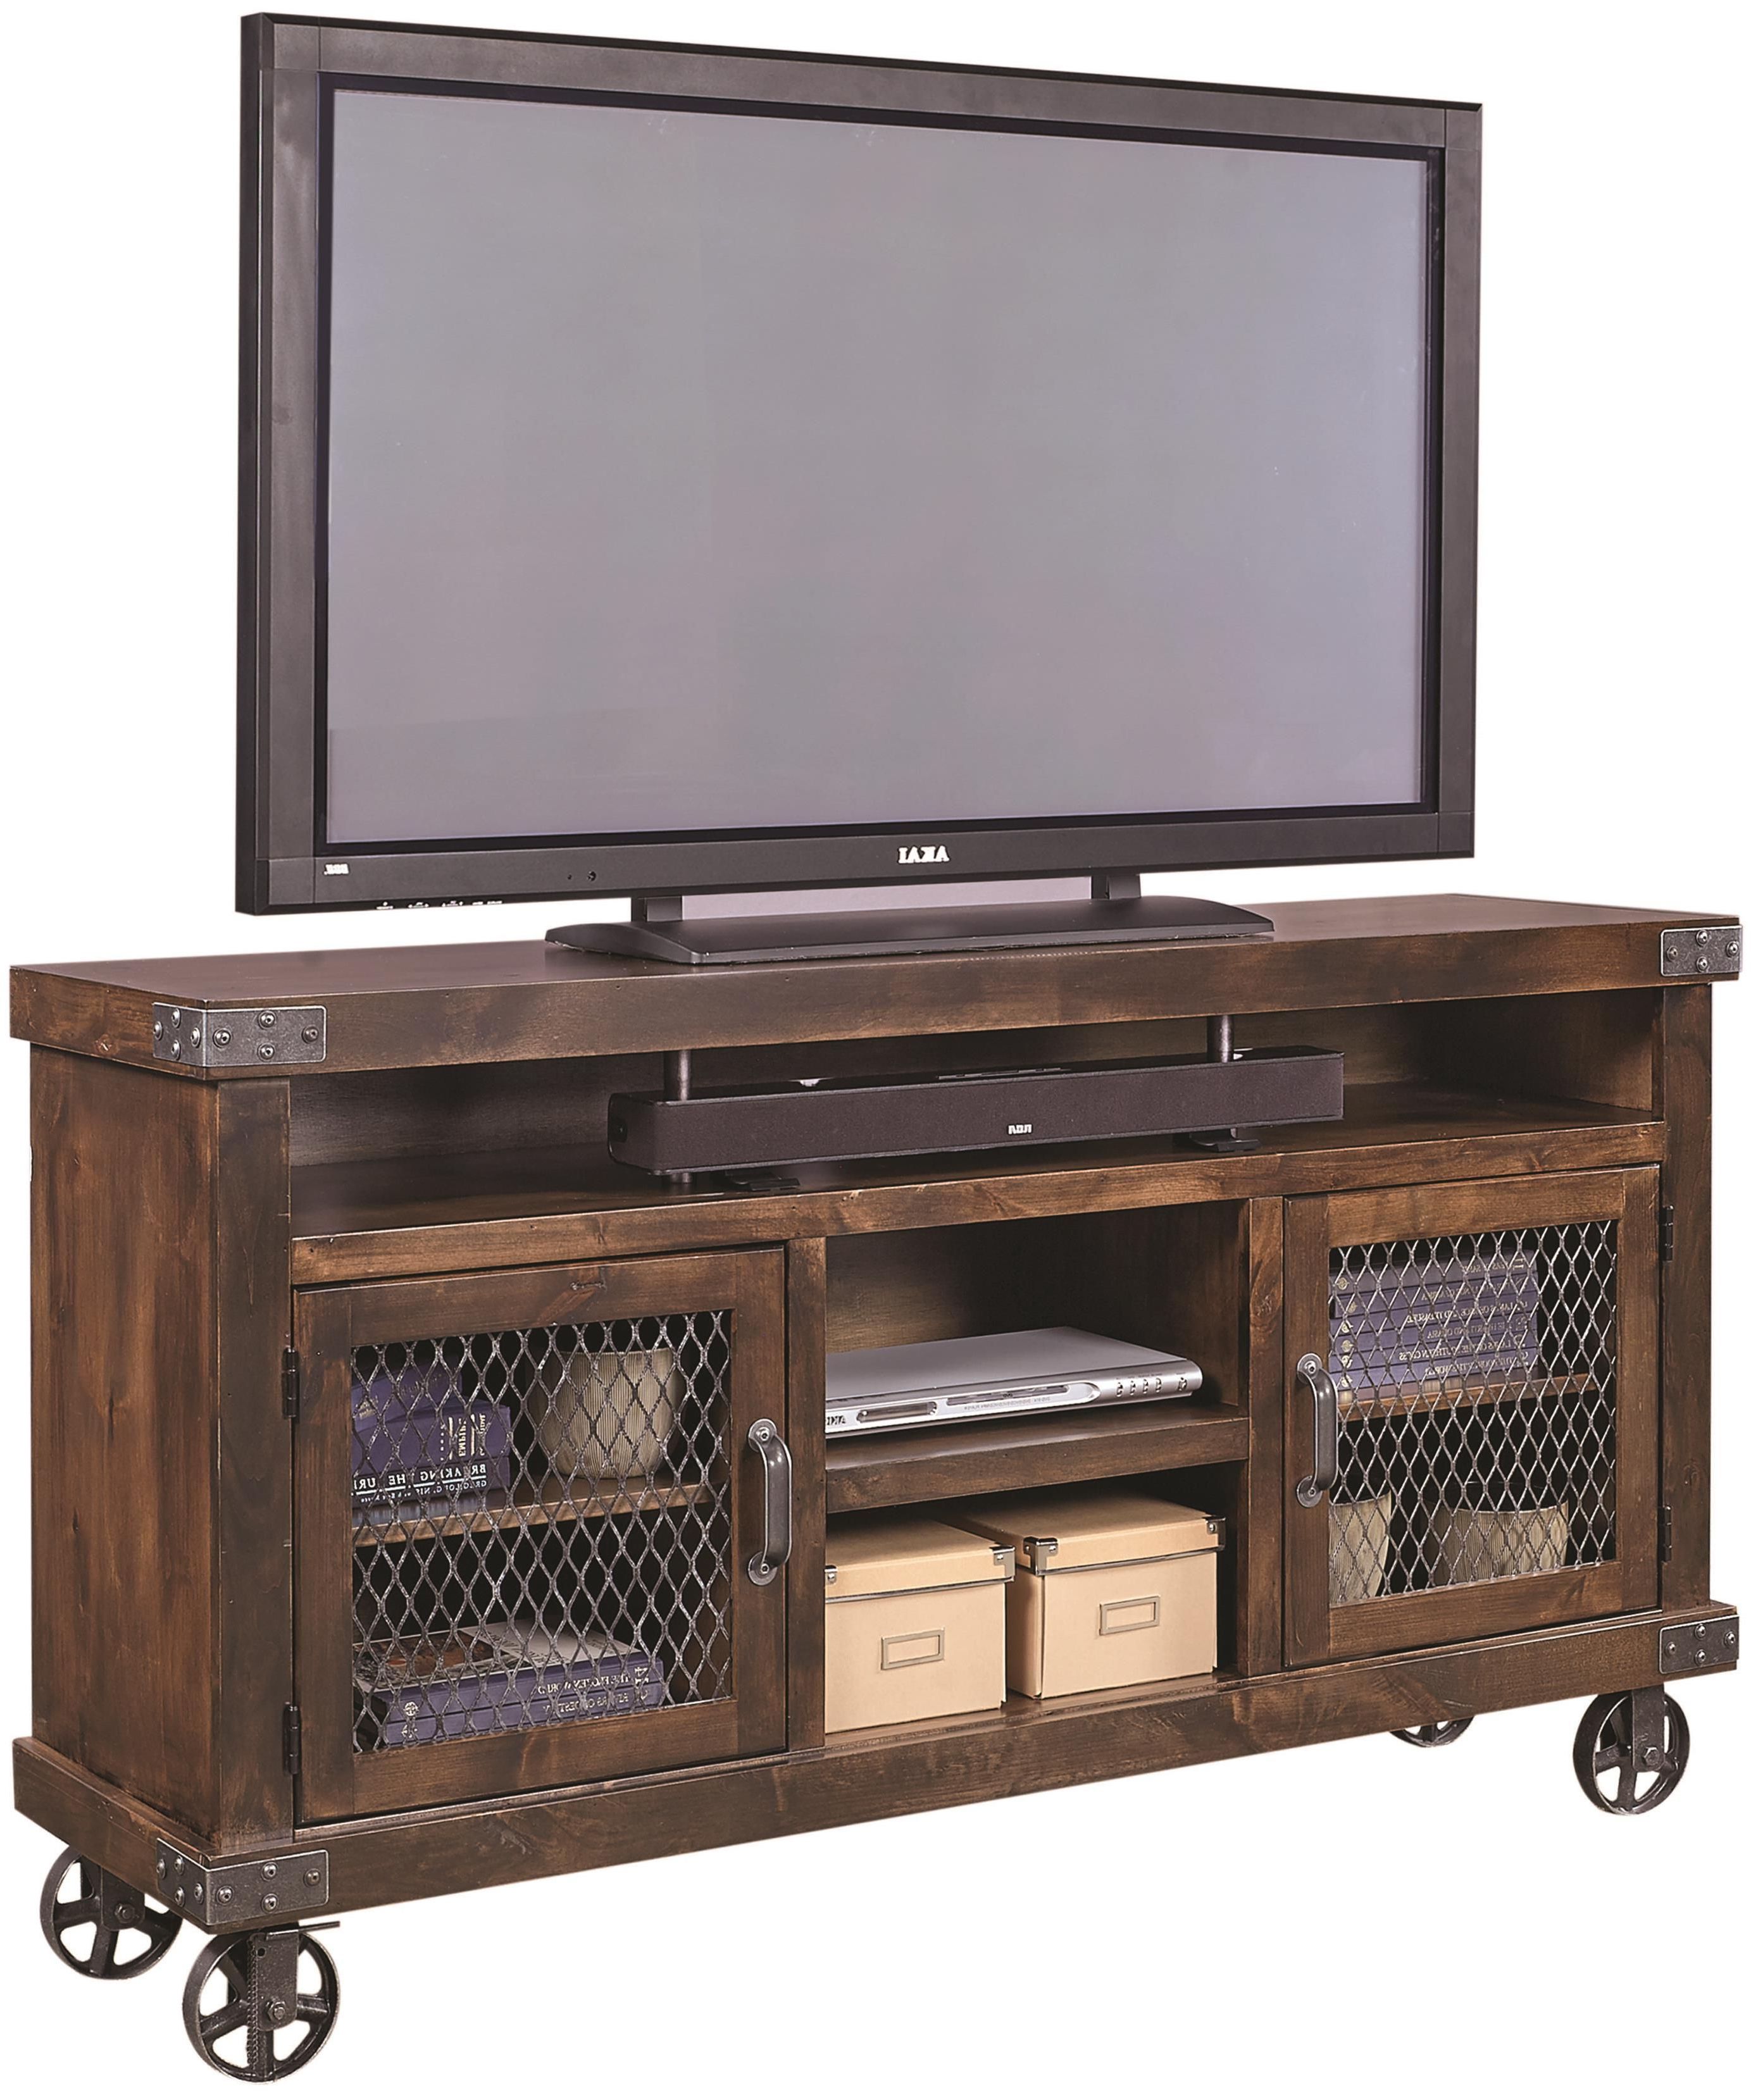 Rustic Furniture Tv Stands With Latest Industrial 65" Console With Metal Castersaspenhome In  (View 3 of 20)